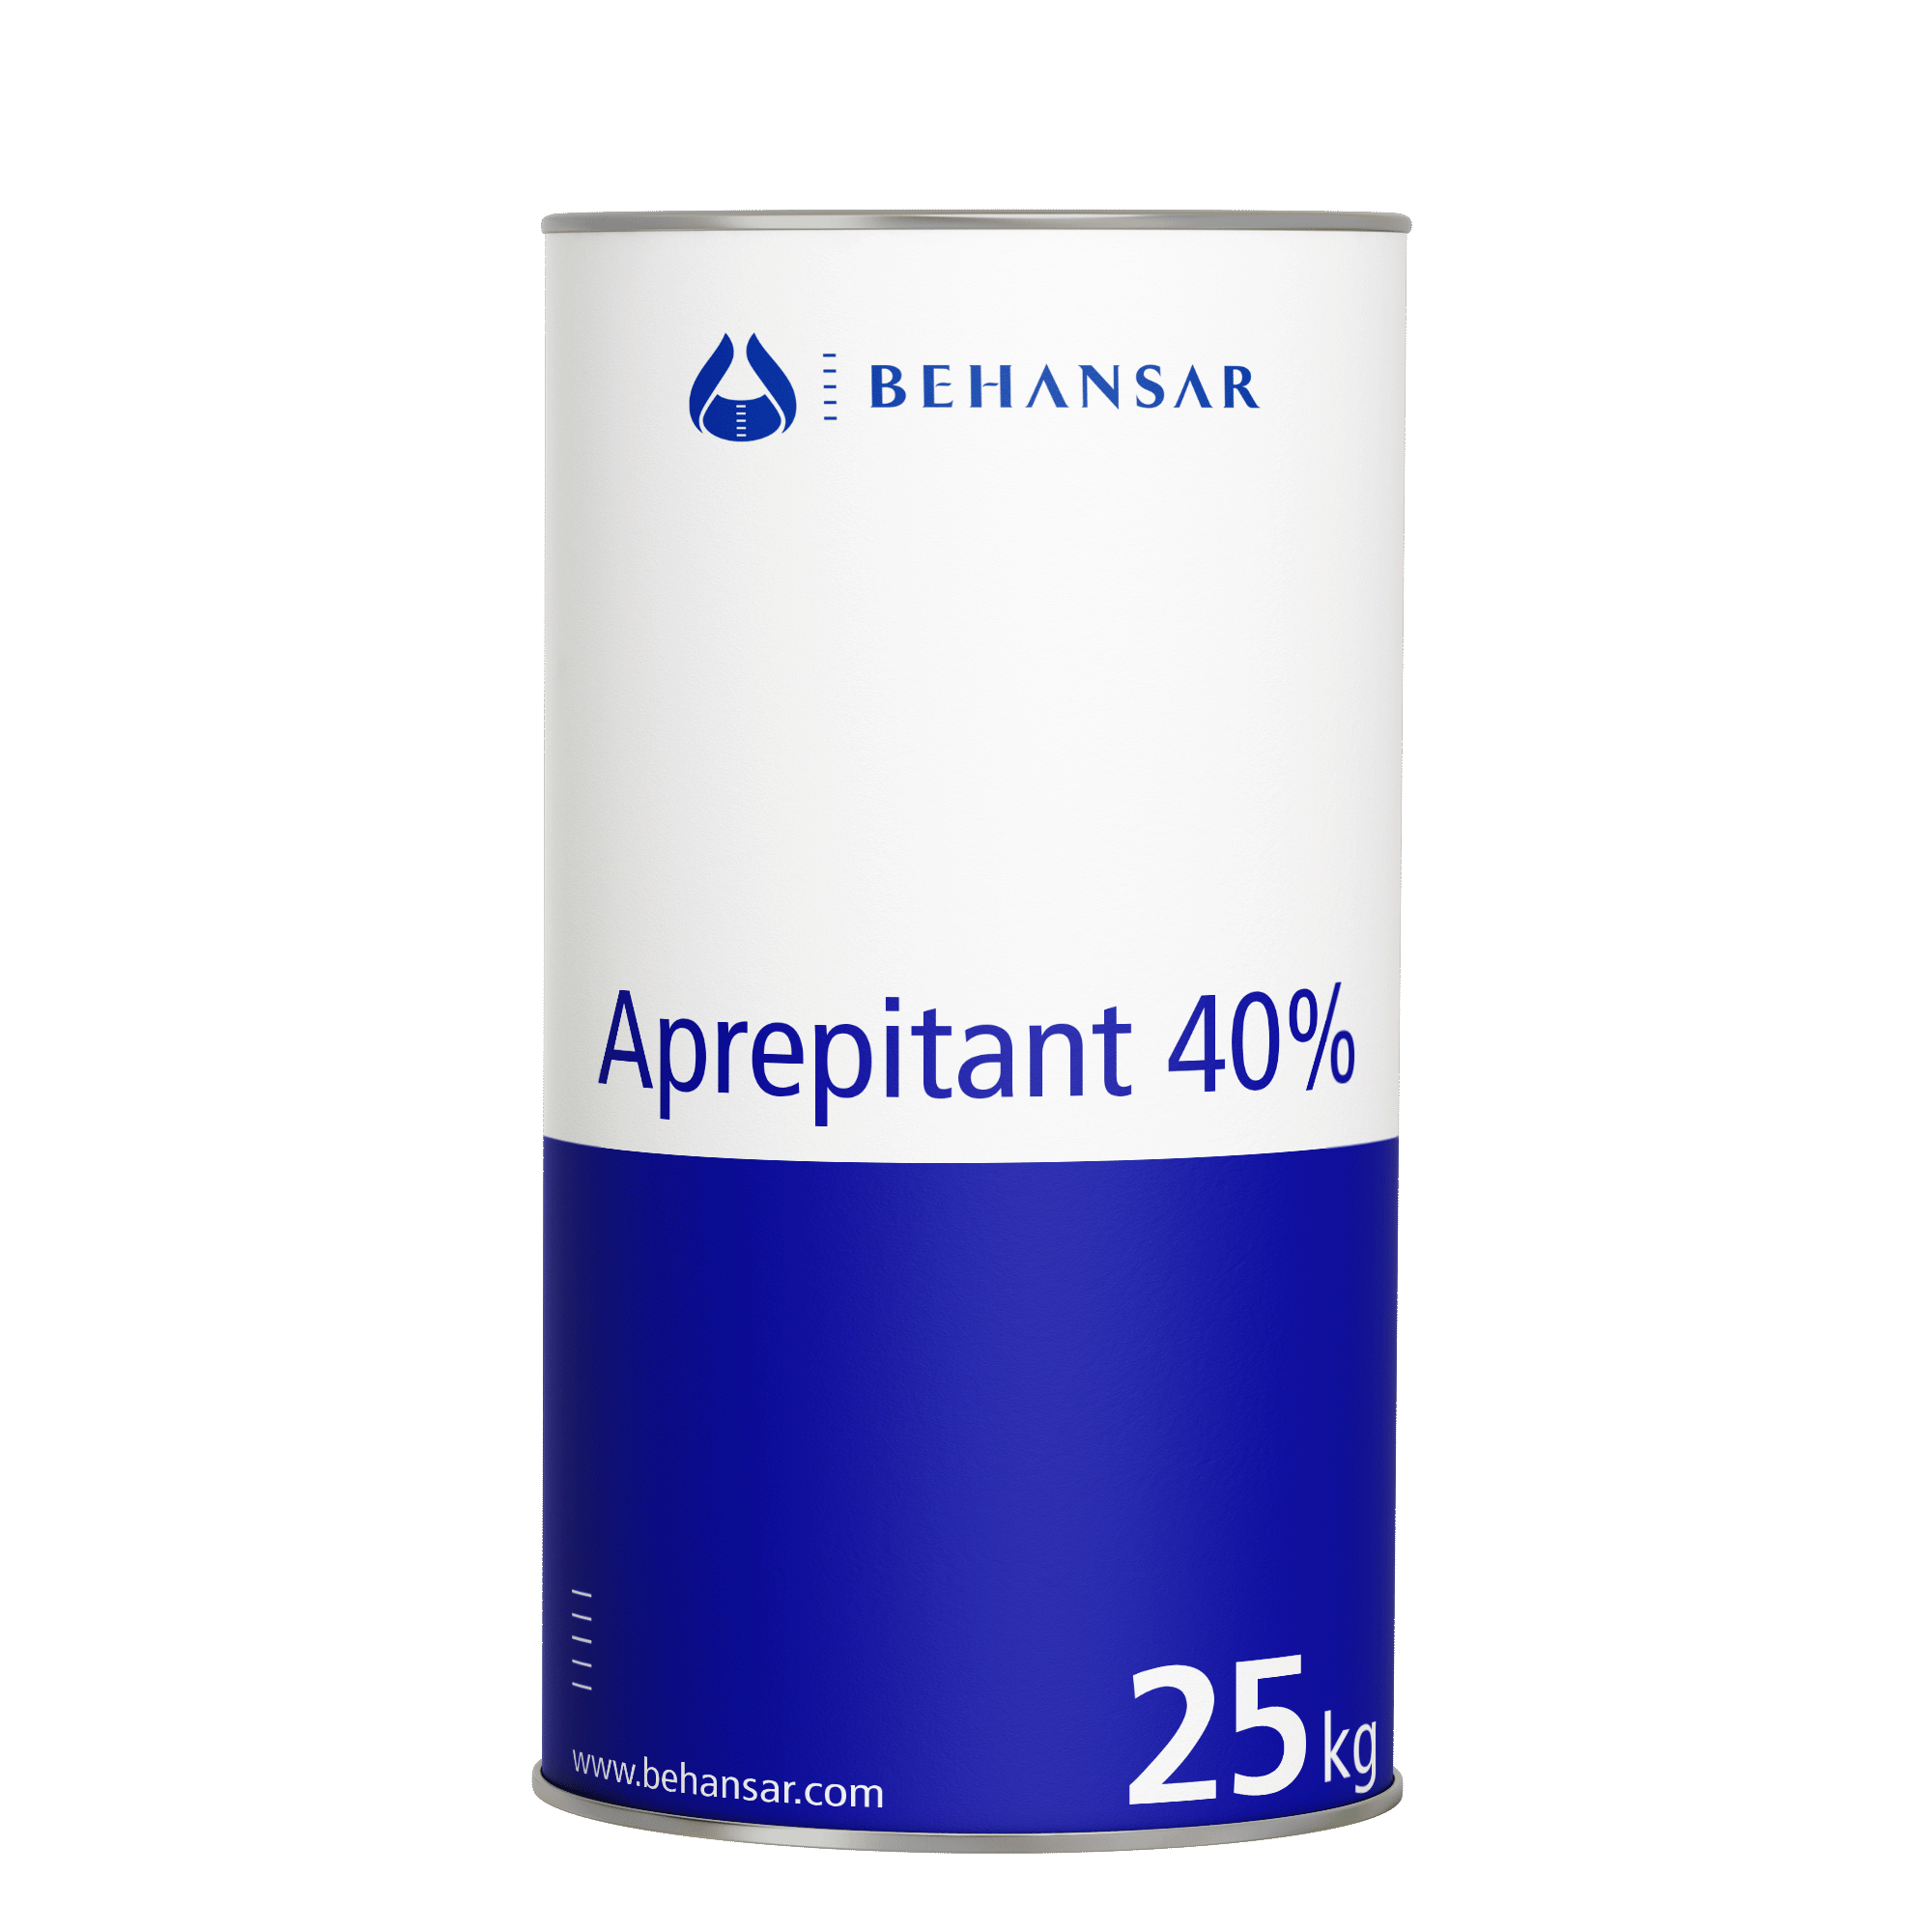 Aprepitant 40% is one of the products of Behansar Co